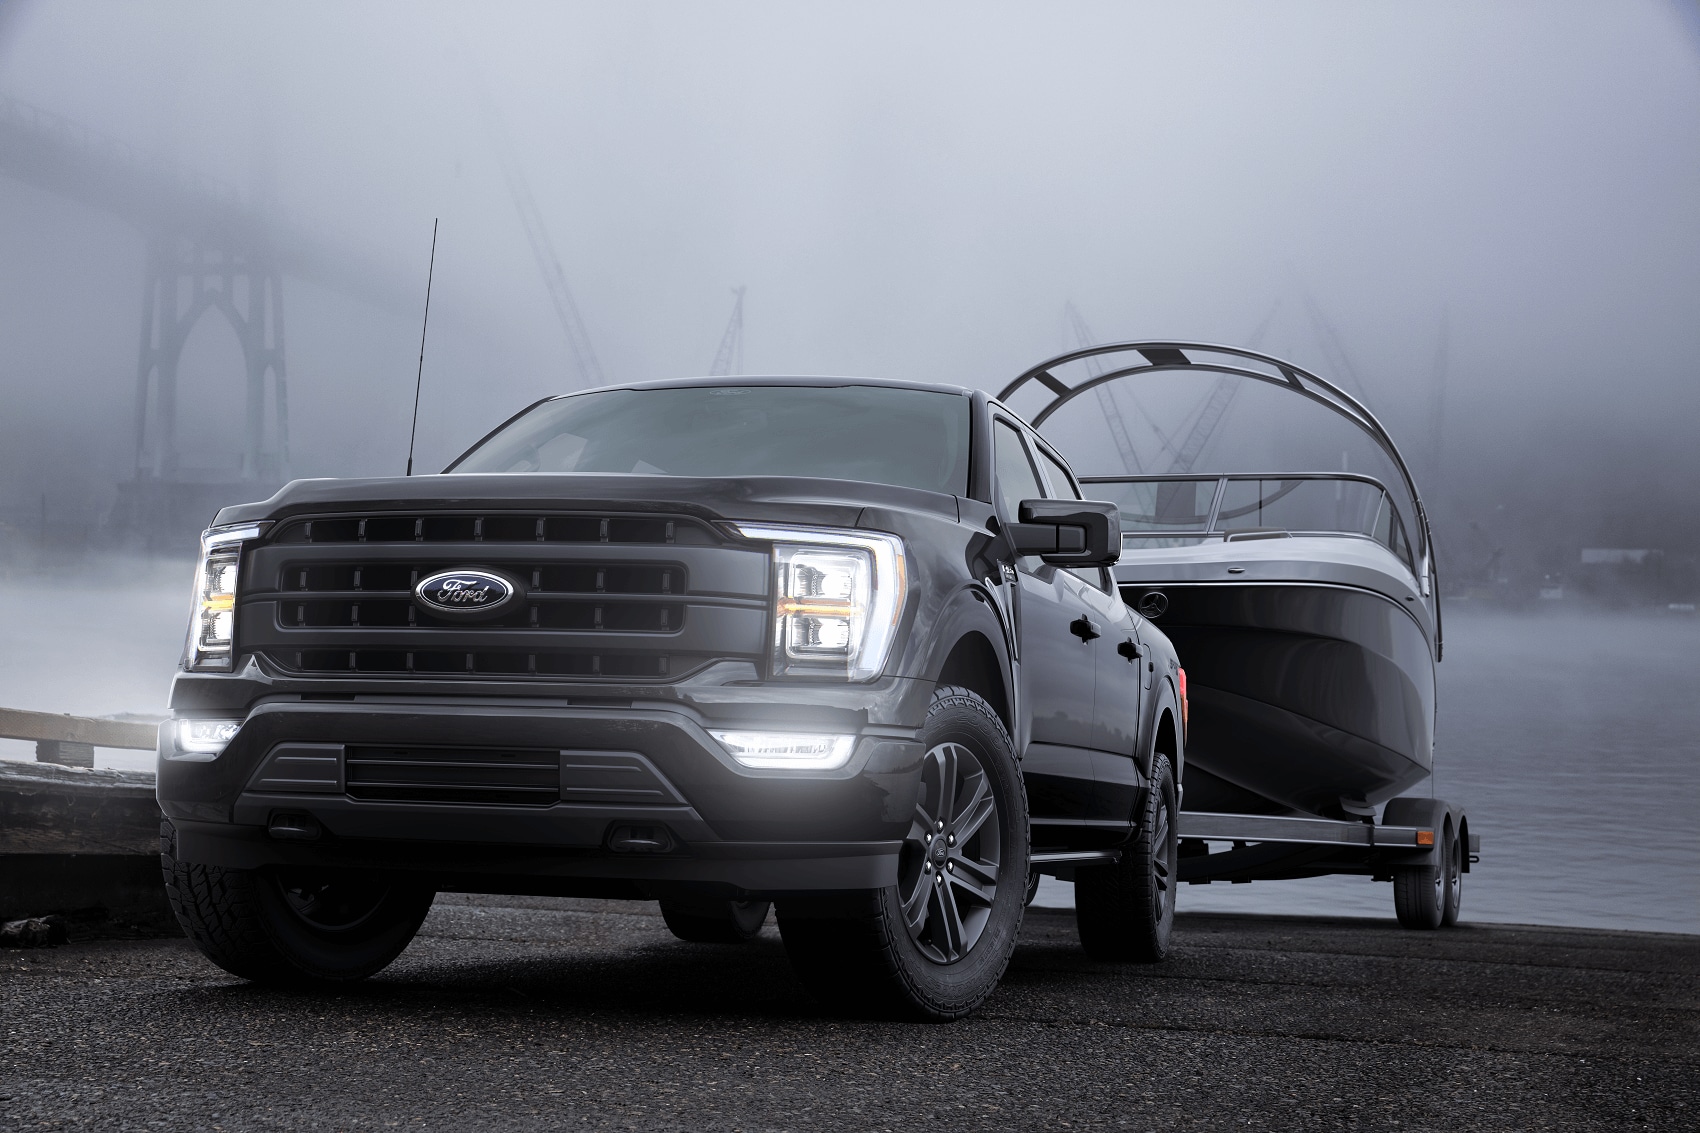 2021 Ford F-150 Towing Capacity | Fred Beans Ford of Mechanicsburg 2021 Ford F 150 V6 Towing Capacity